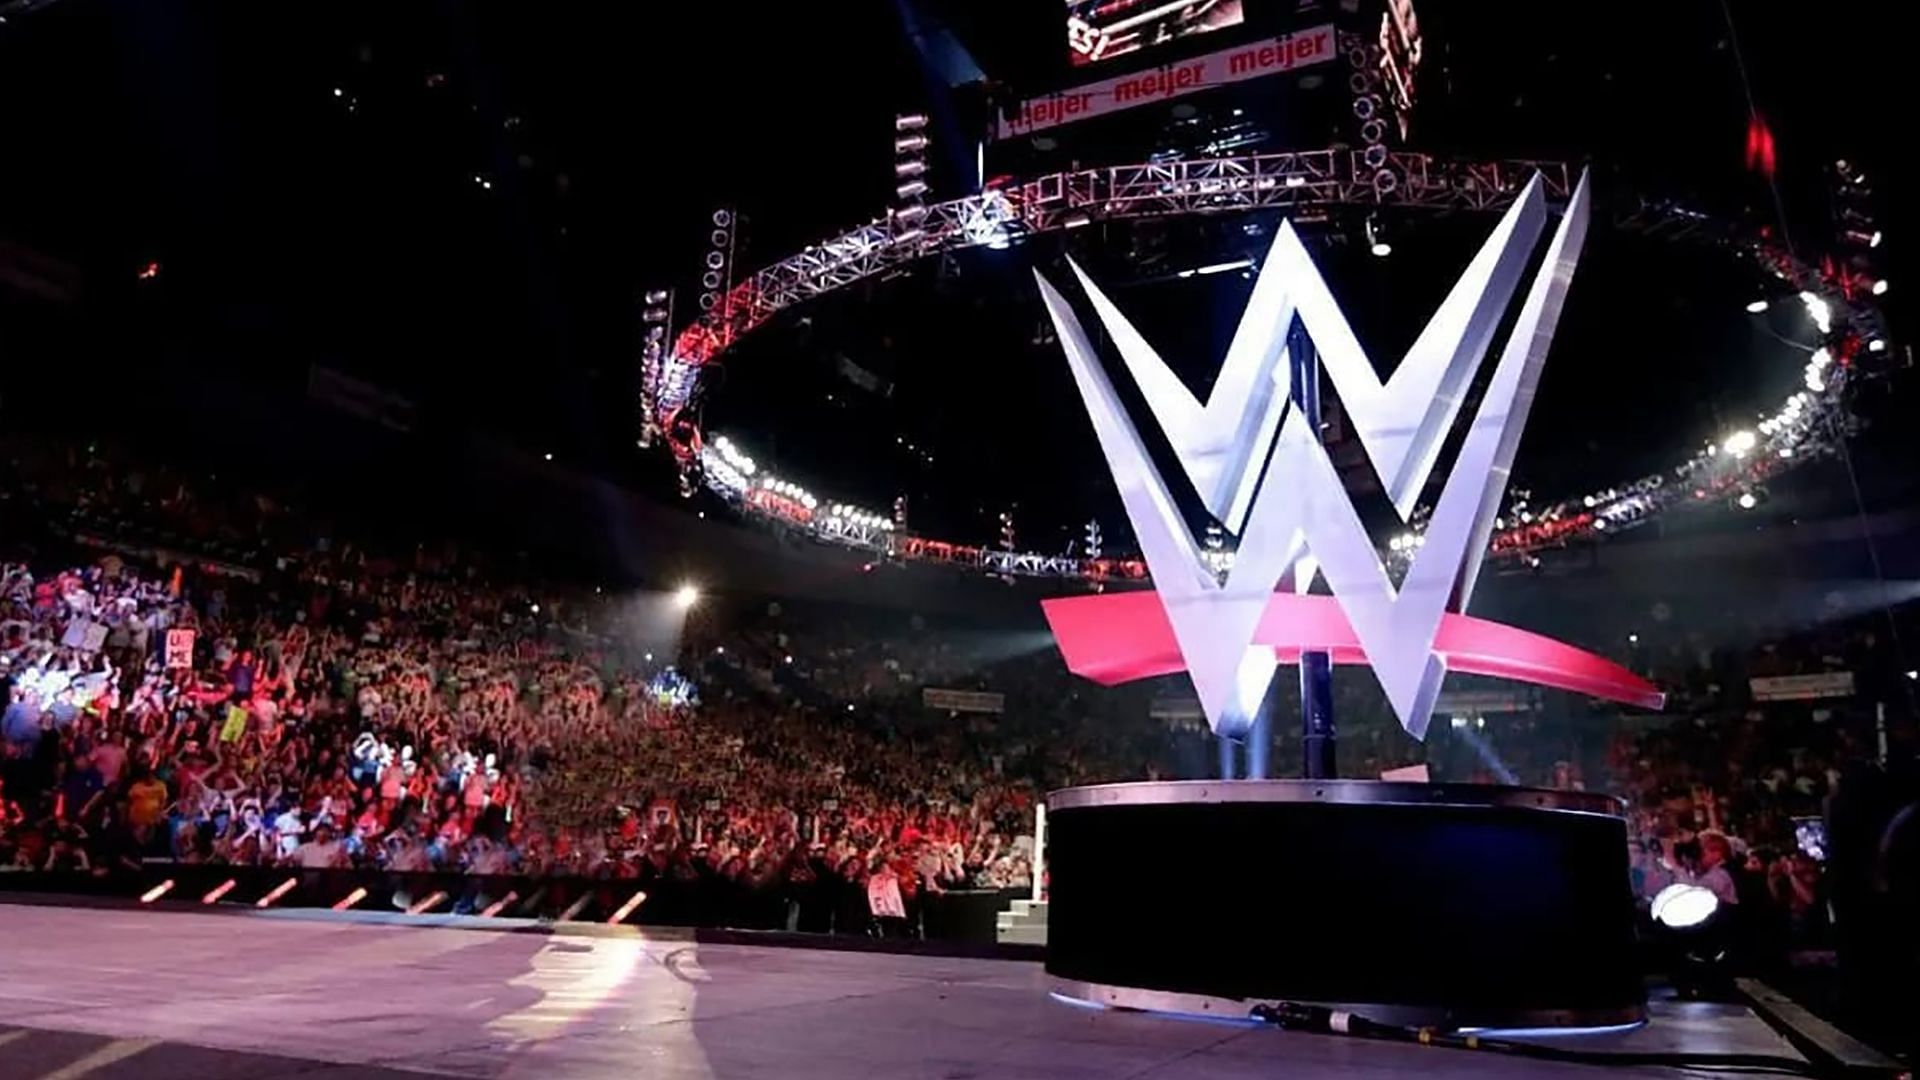 The WWE logo and stage on display inside arena